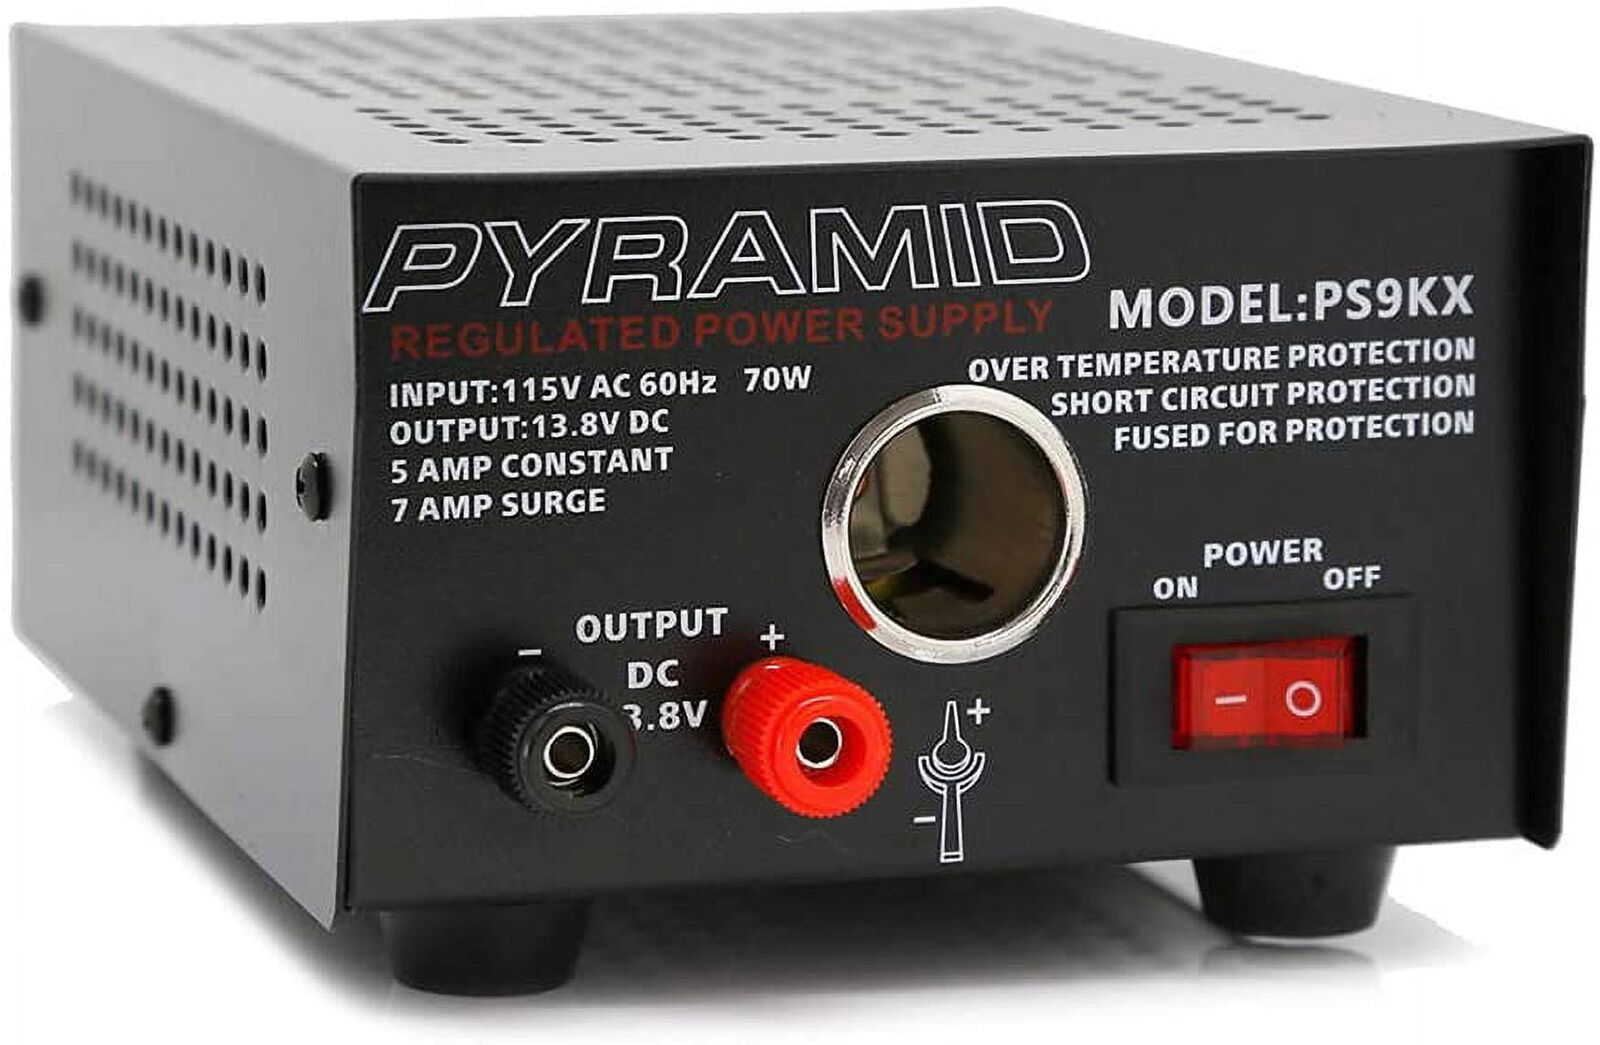 Universal Compact Bench Power Supply-5 Amp Linear Regulated Benchtop Converter